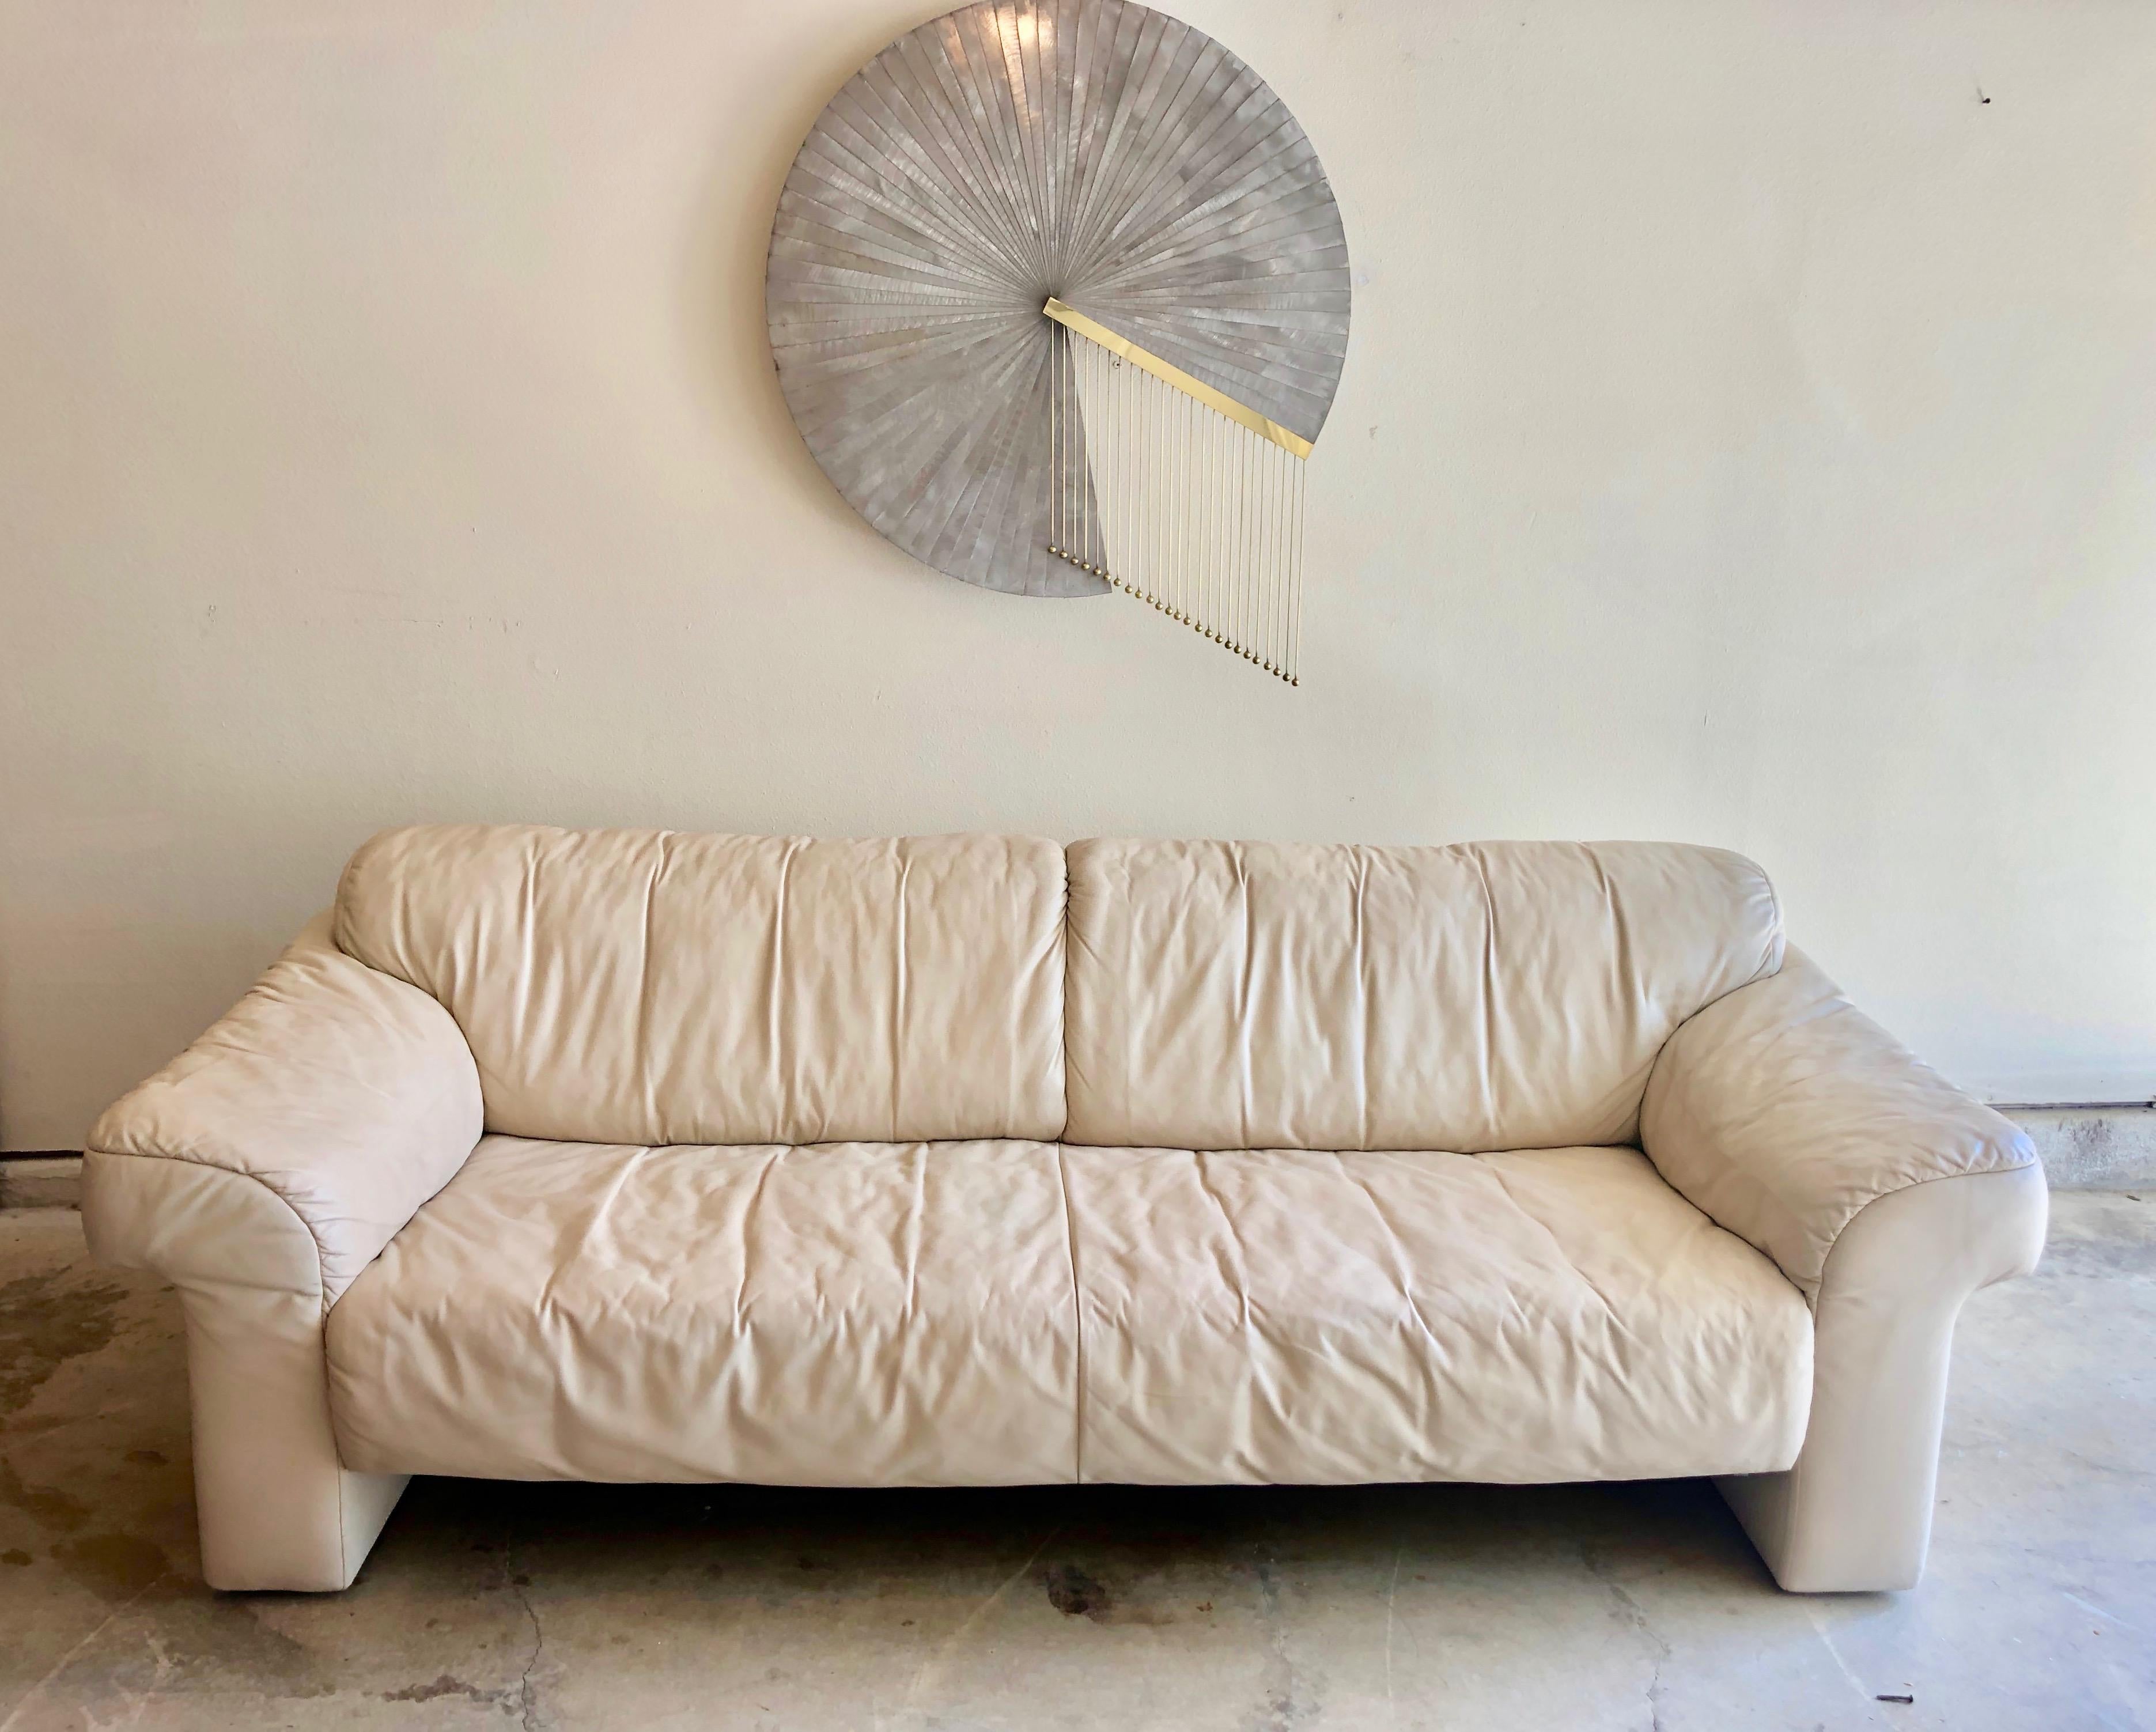 Leather sofa by WK Möbel in a light cream / ivory color. This sofa is extremely comfy and great for long term lounging!